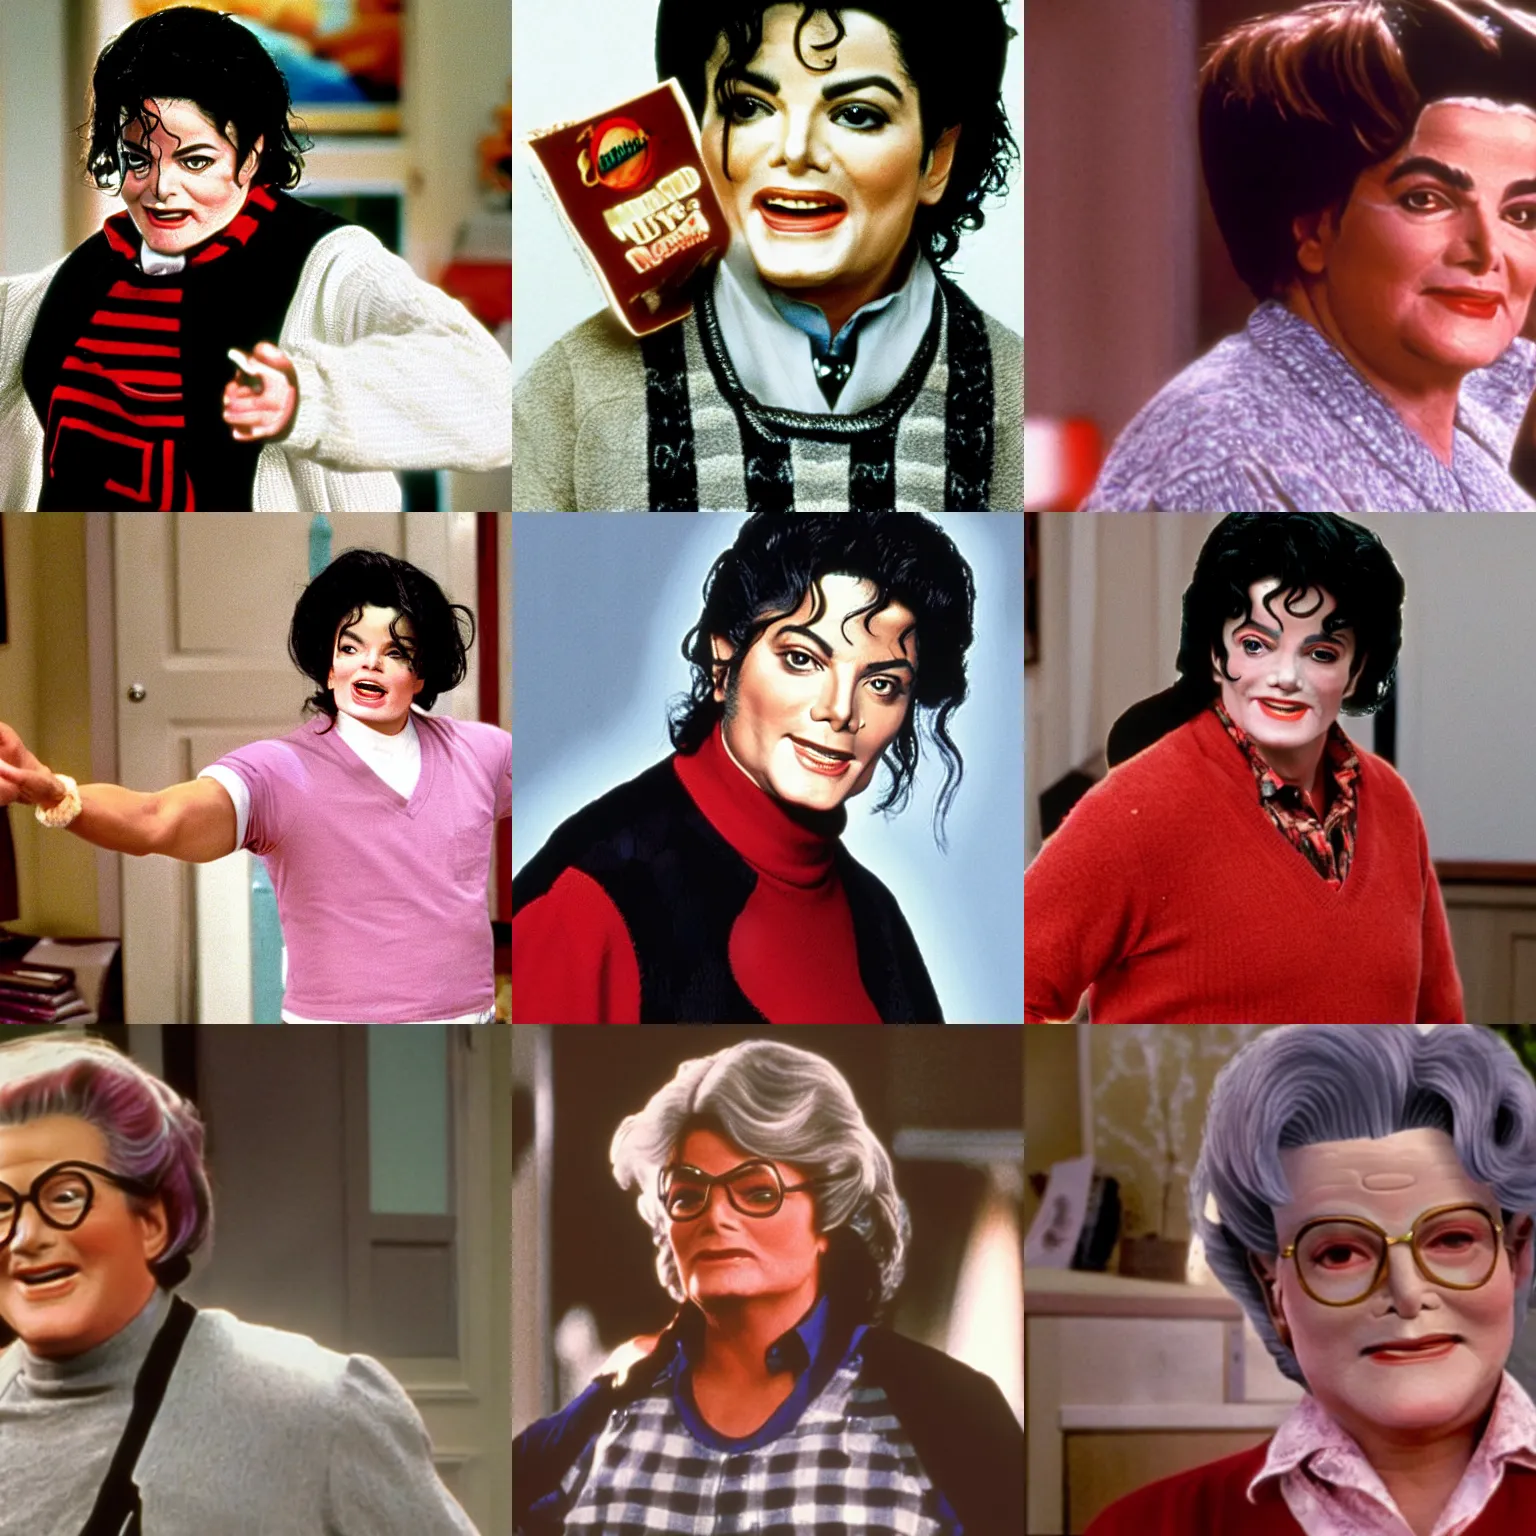 Prompt: michael jackson as mrs doubtfire, still image from the movie